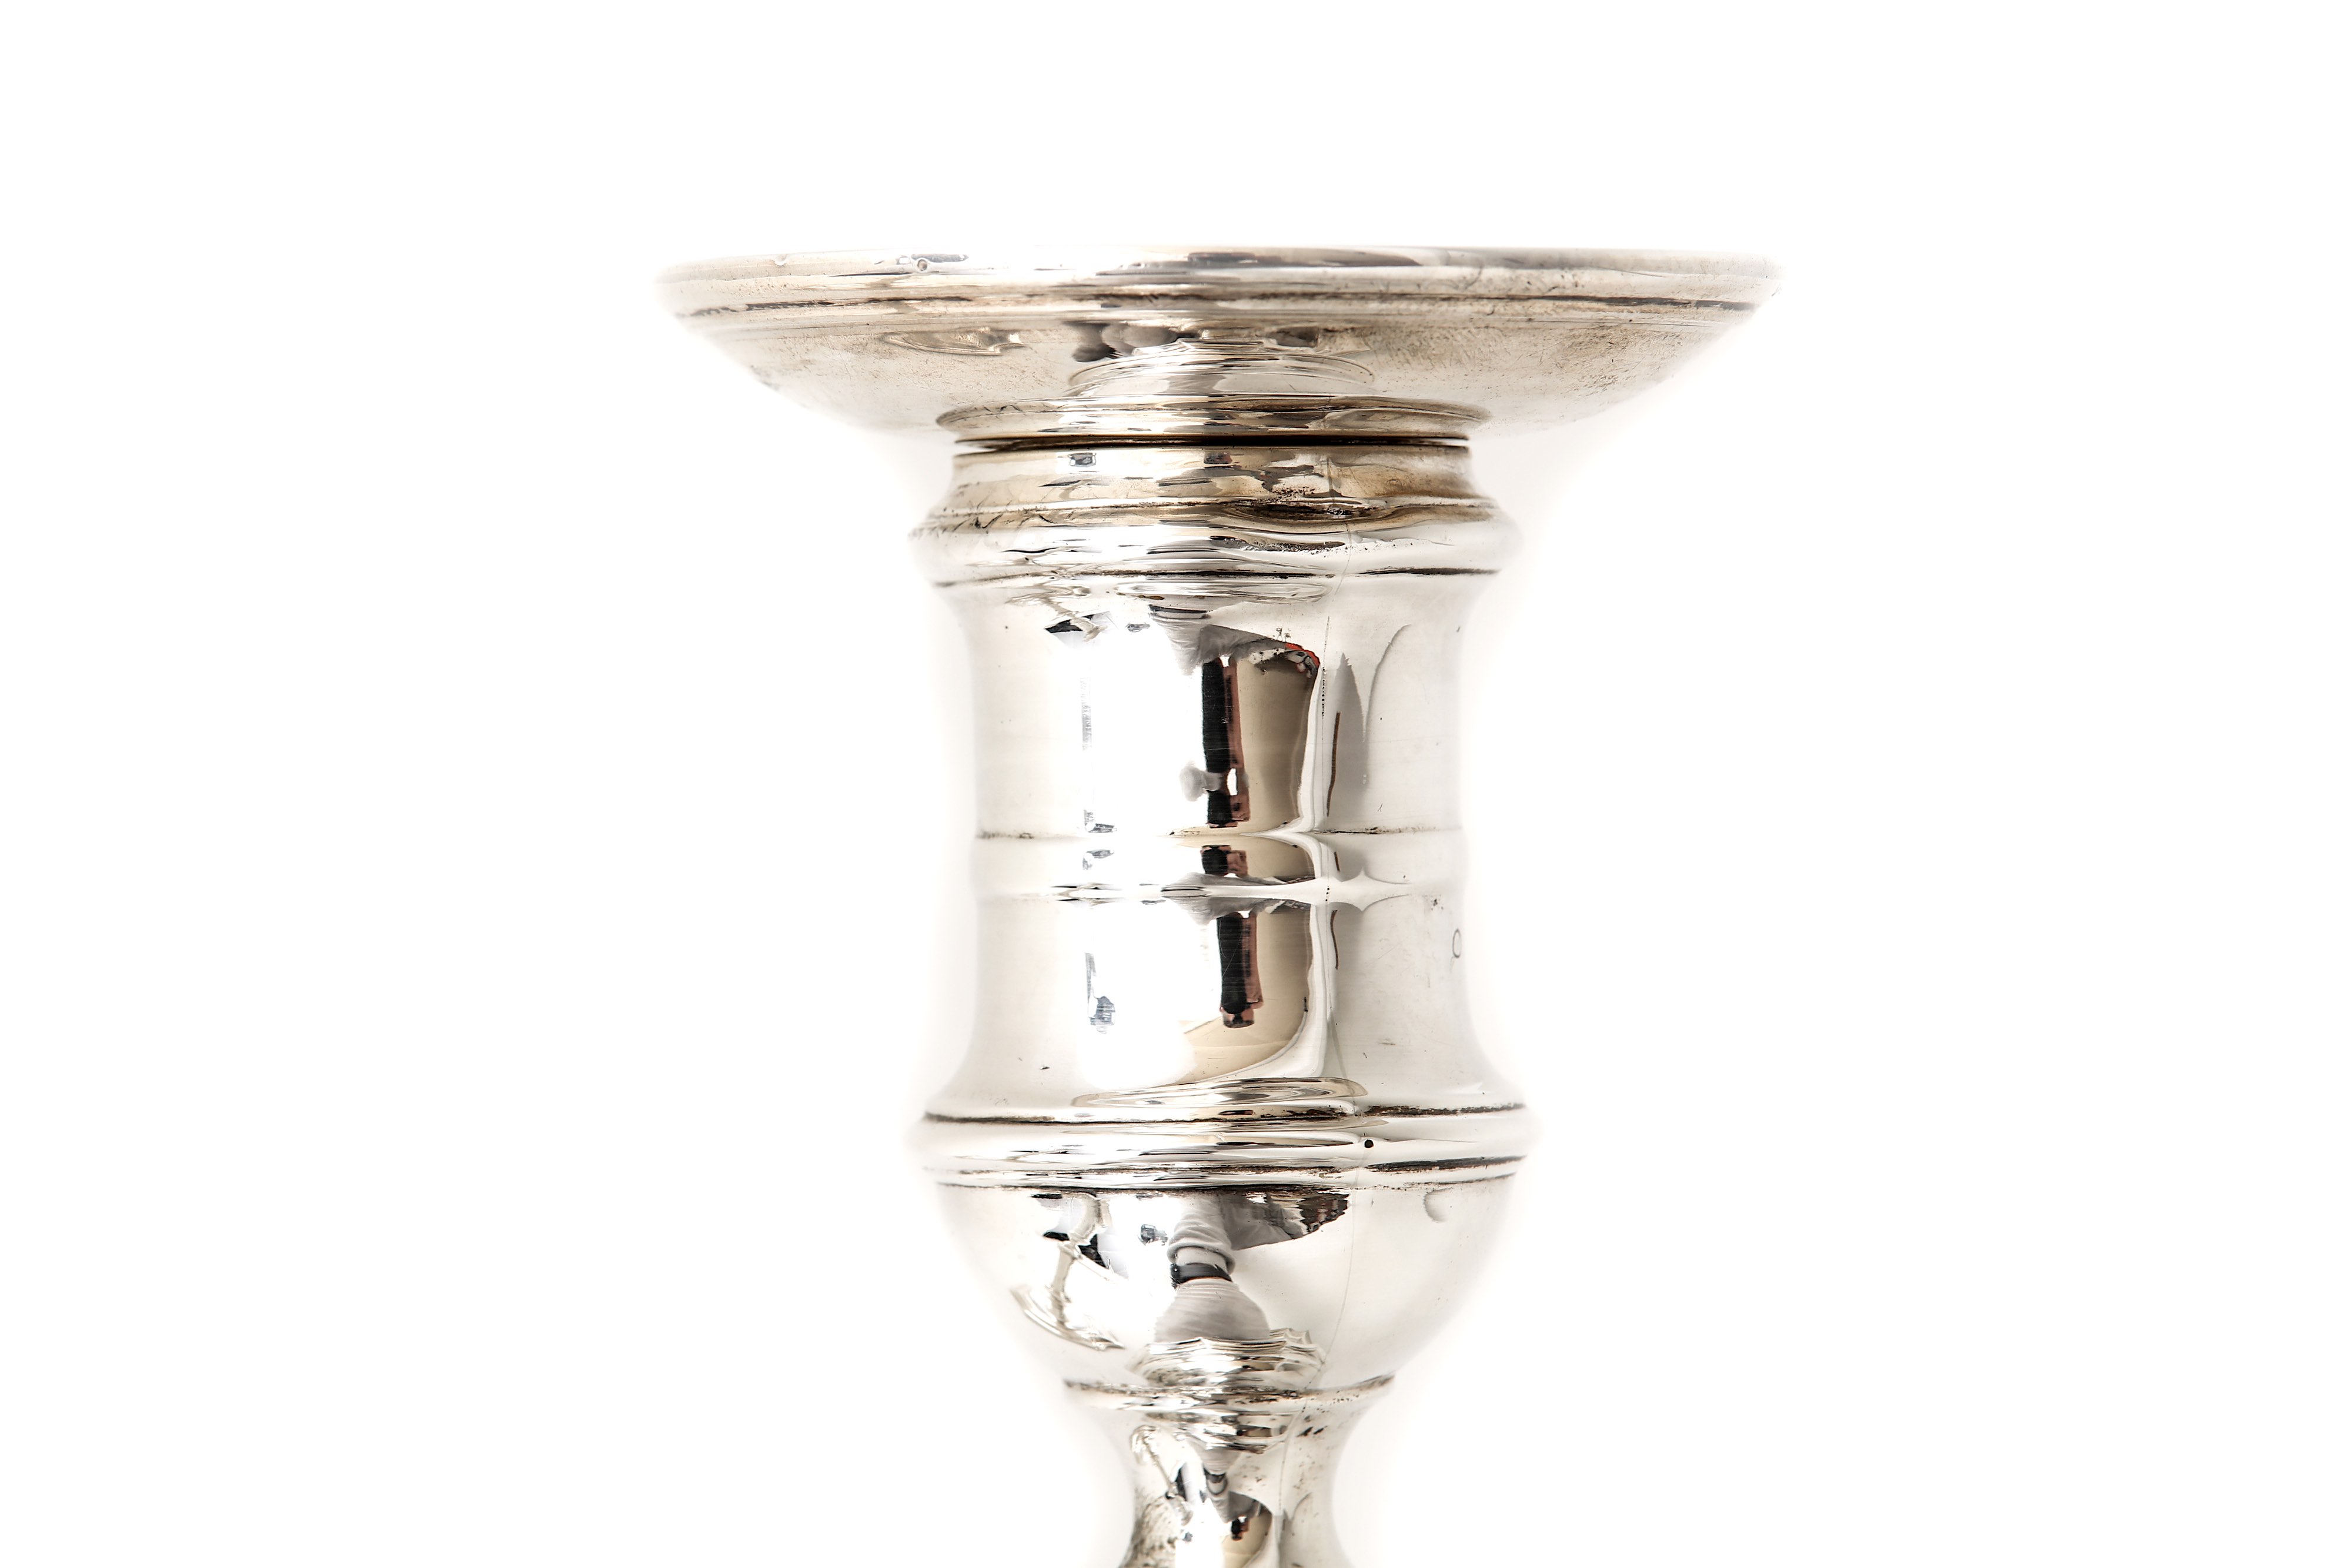 A pair of Edwardian sterling silver candlesticks, London 1906 by Hawksworth, Eyre & Co Ltd - Image 5 of 5